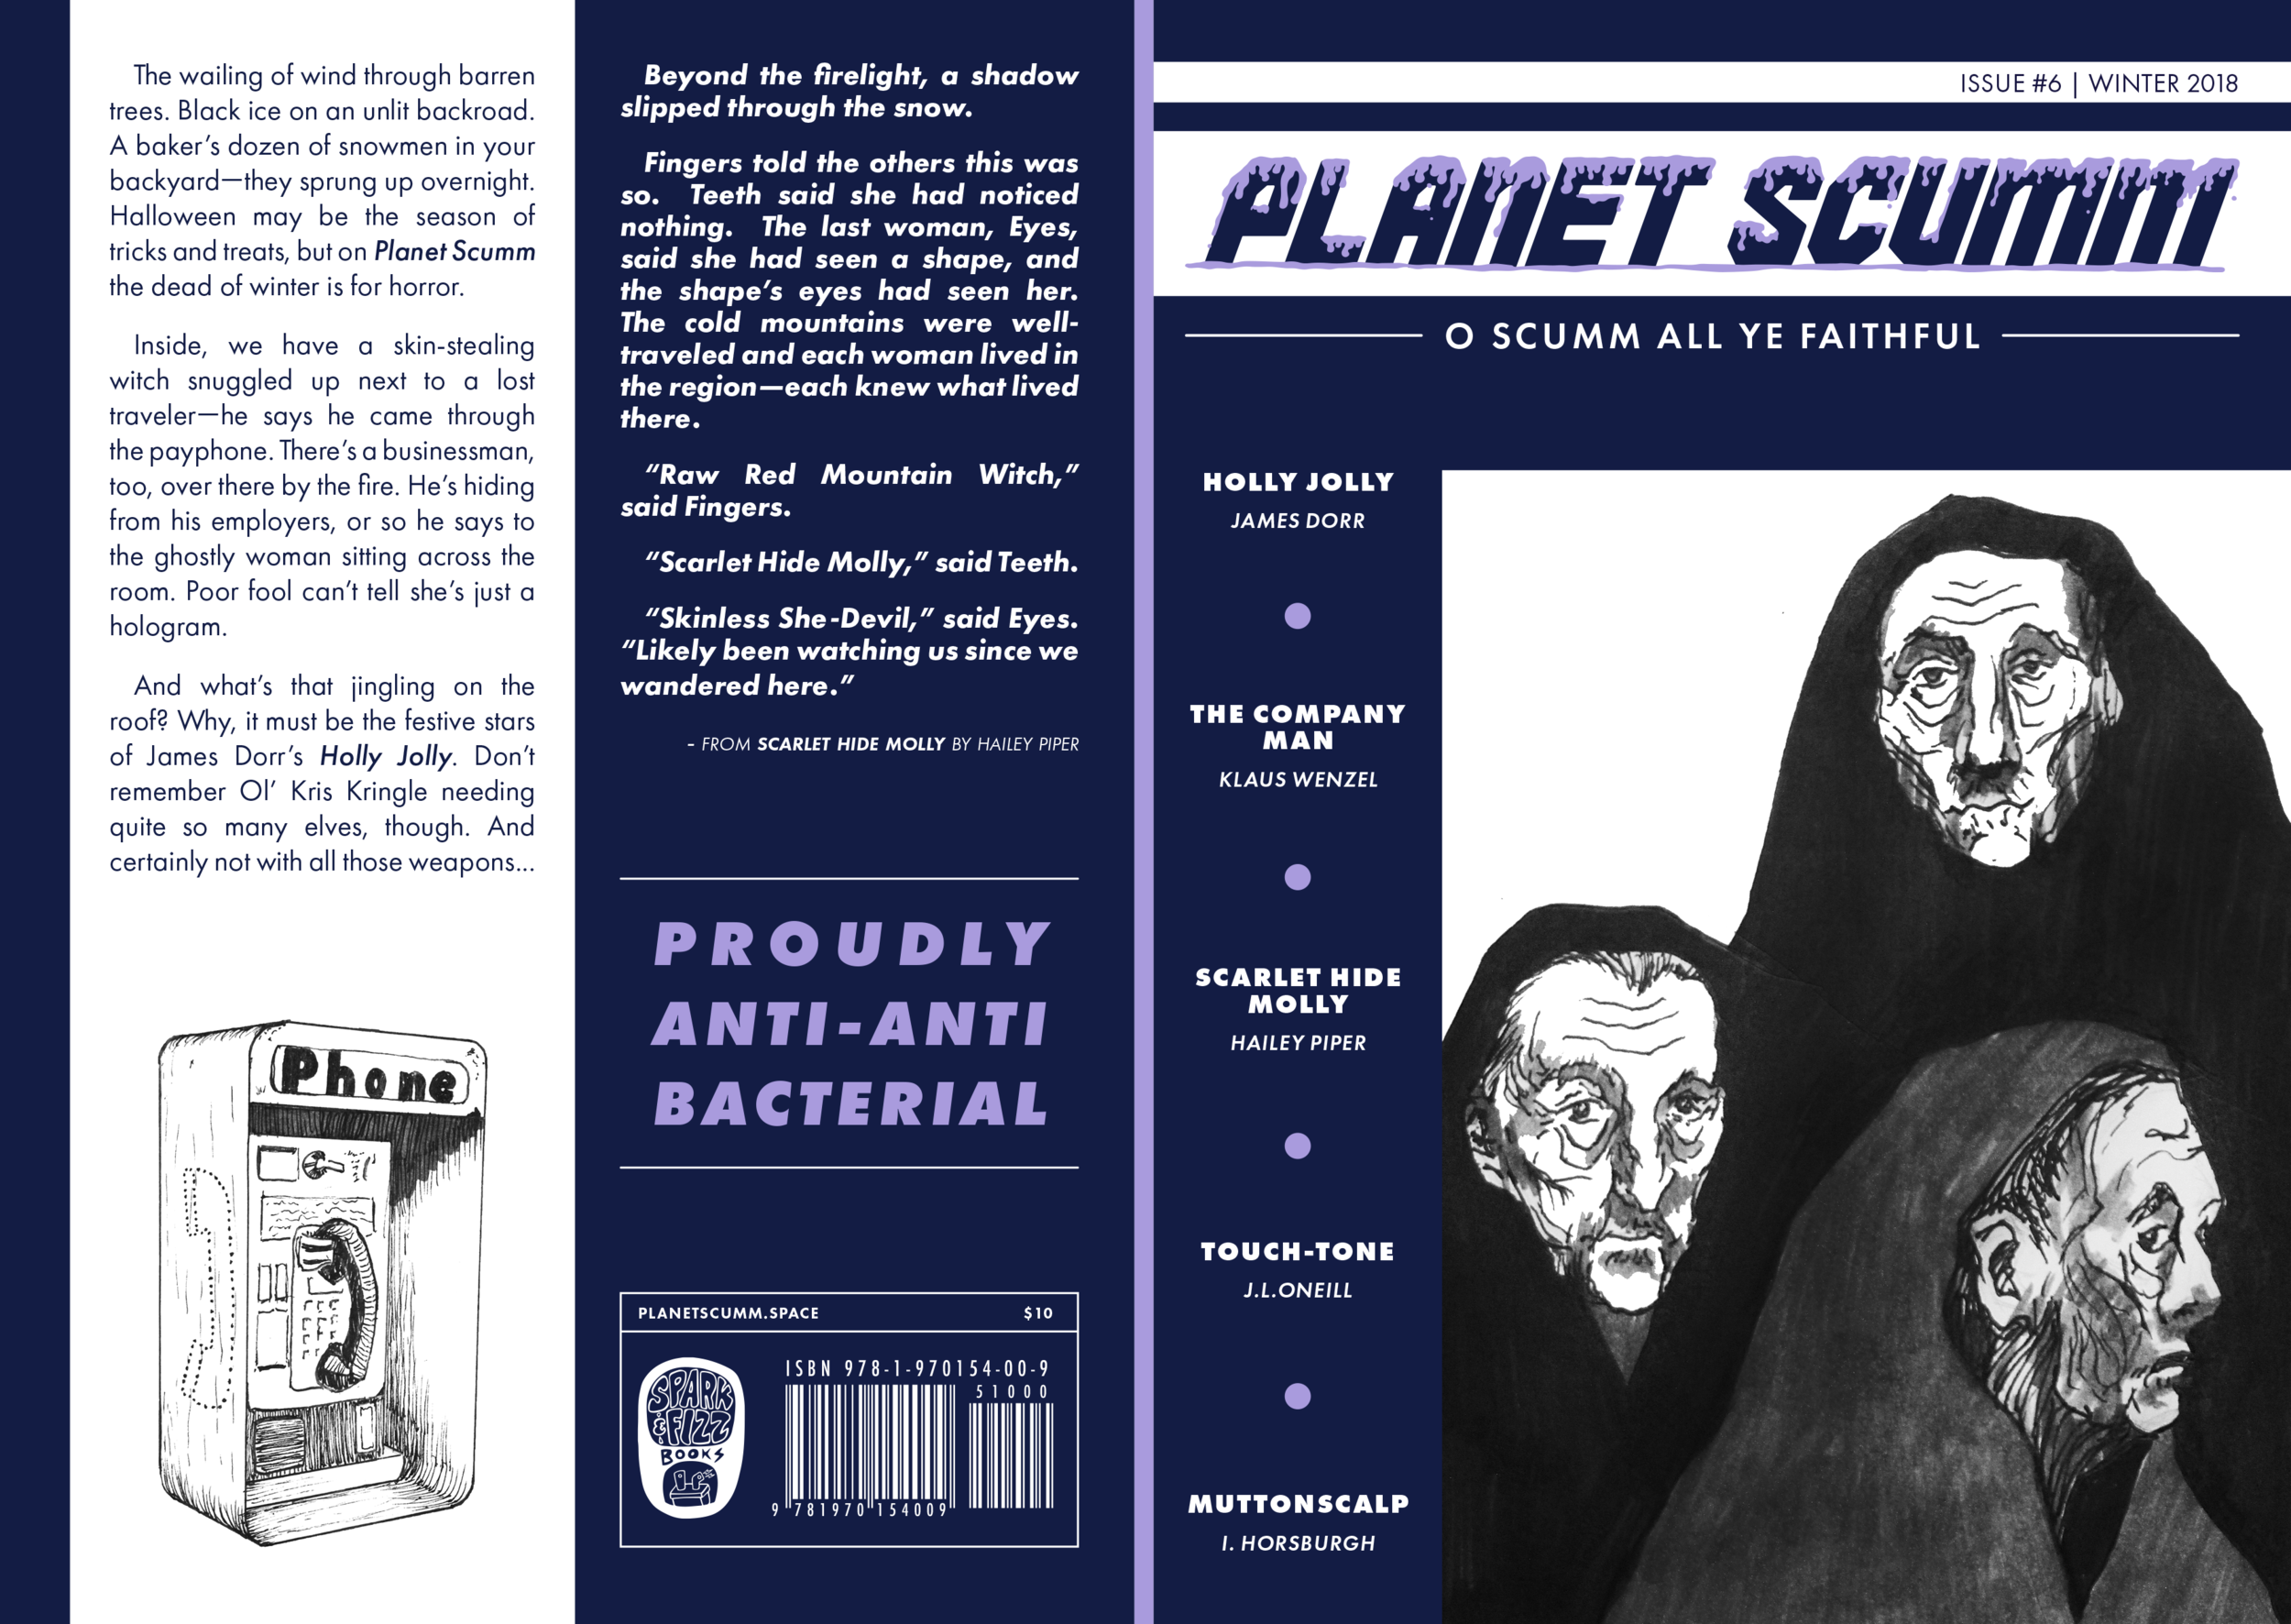  Issue #6 of Planet Scumm  (moving on up)  